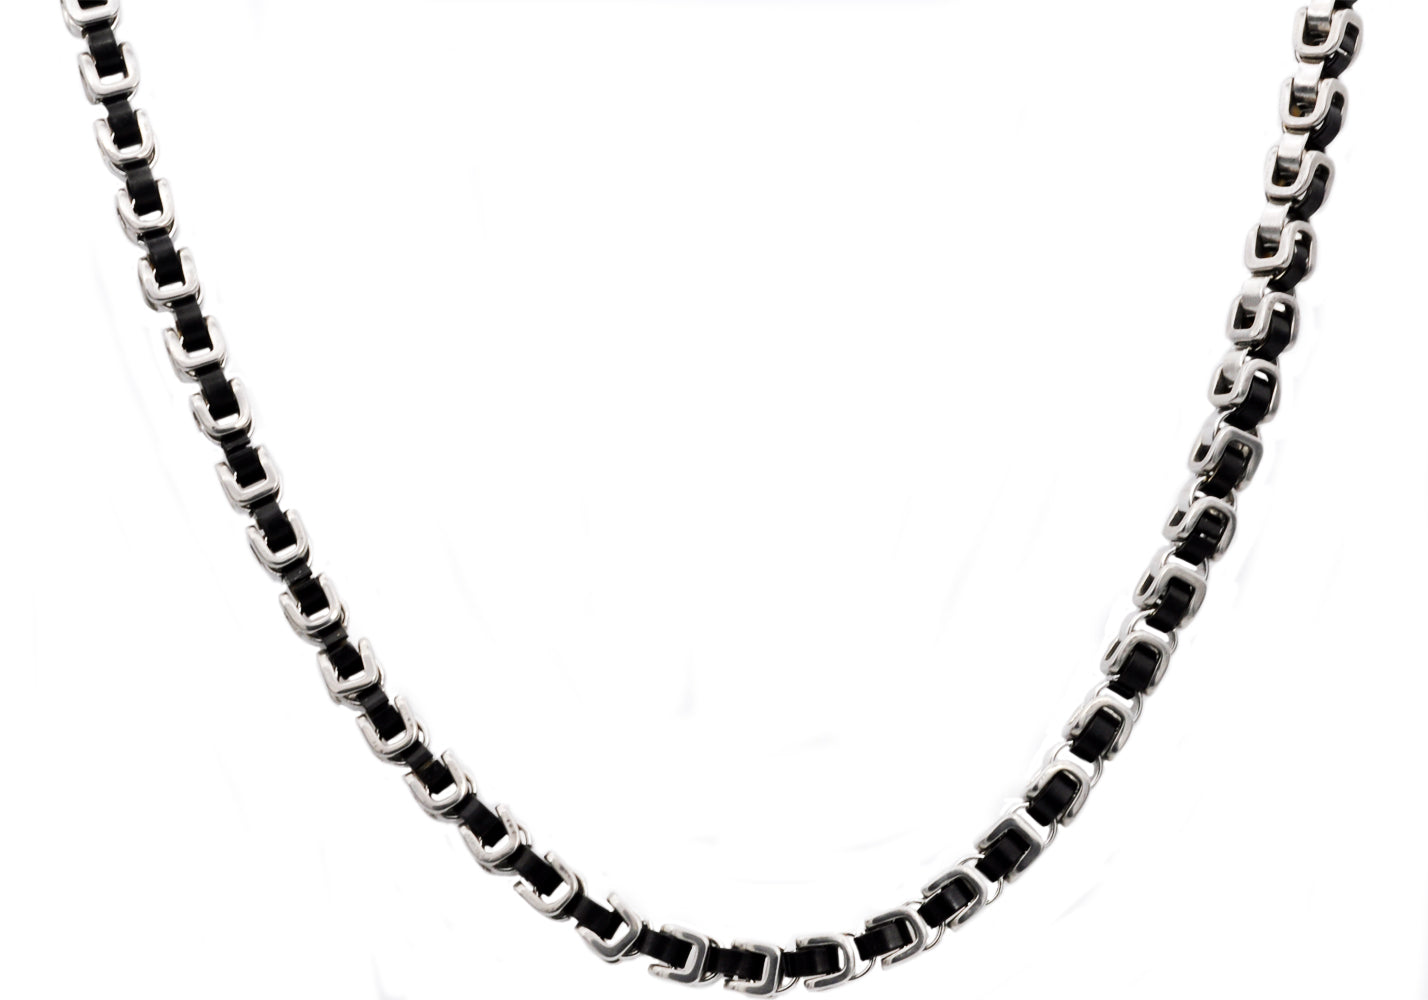 Men's Two-Tone Black Plated 7mm Steel Chain Link Necklace Jewelry